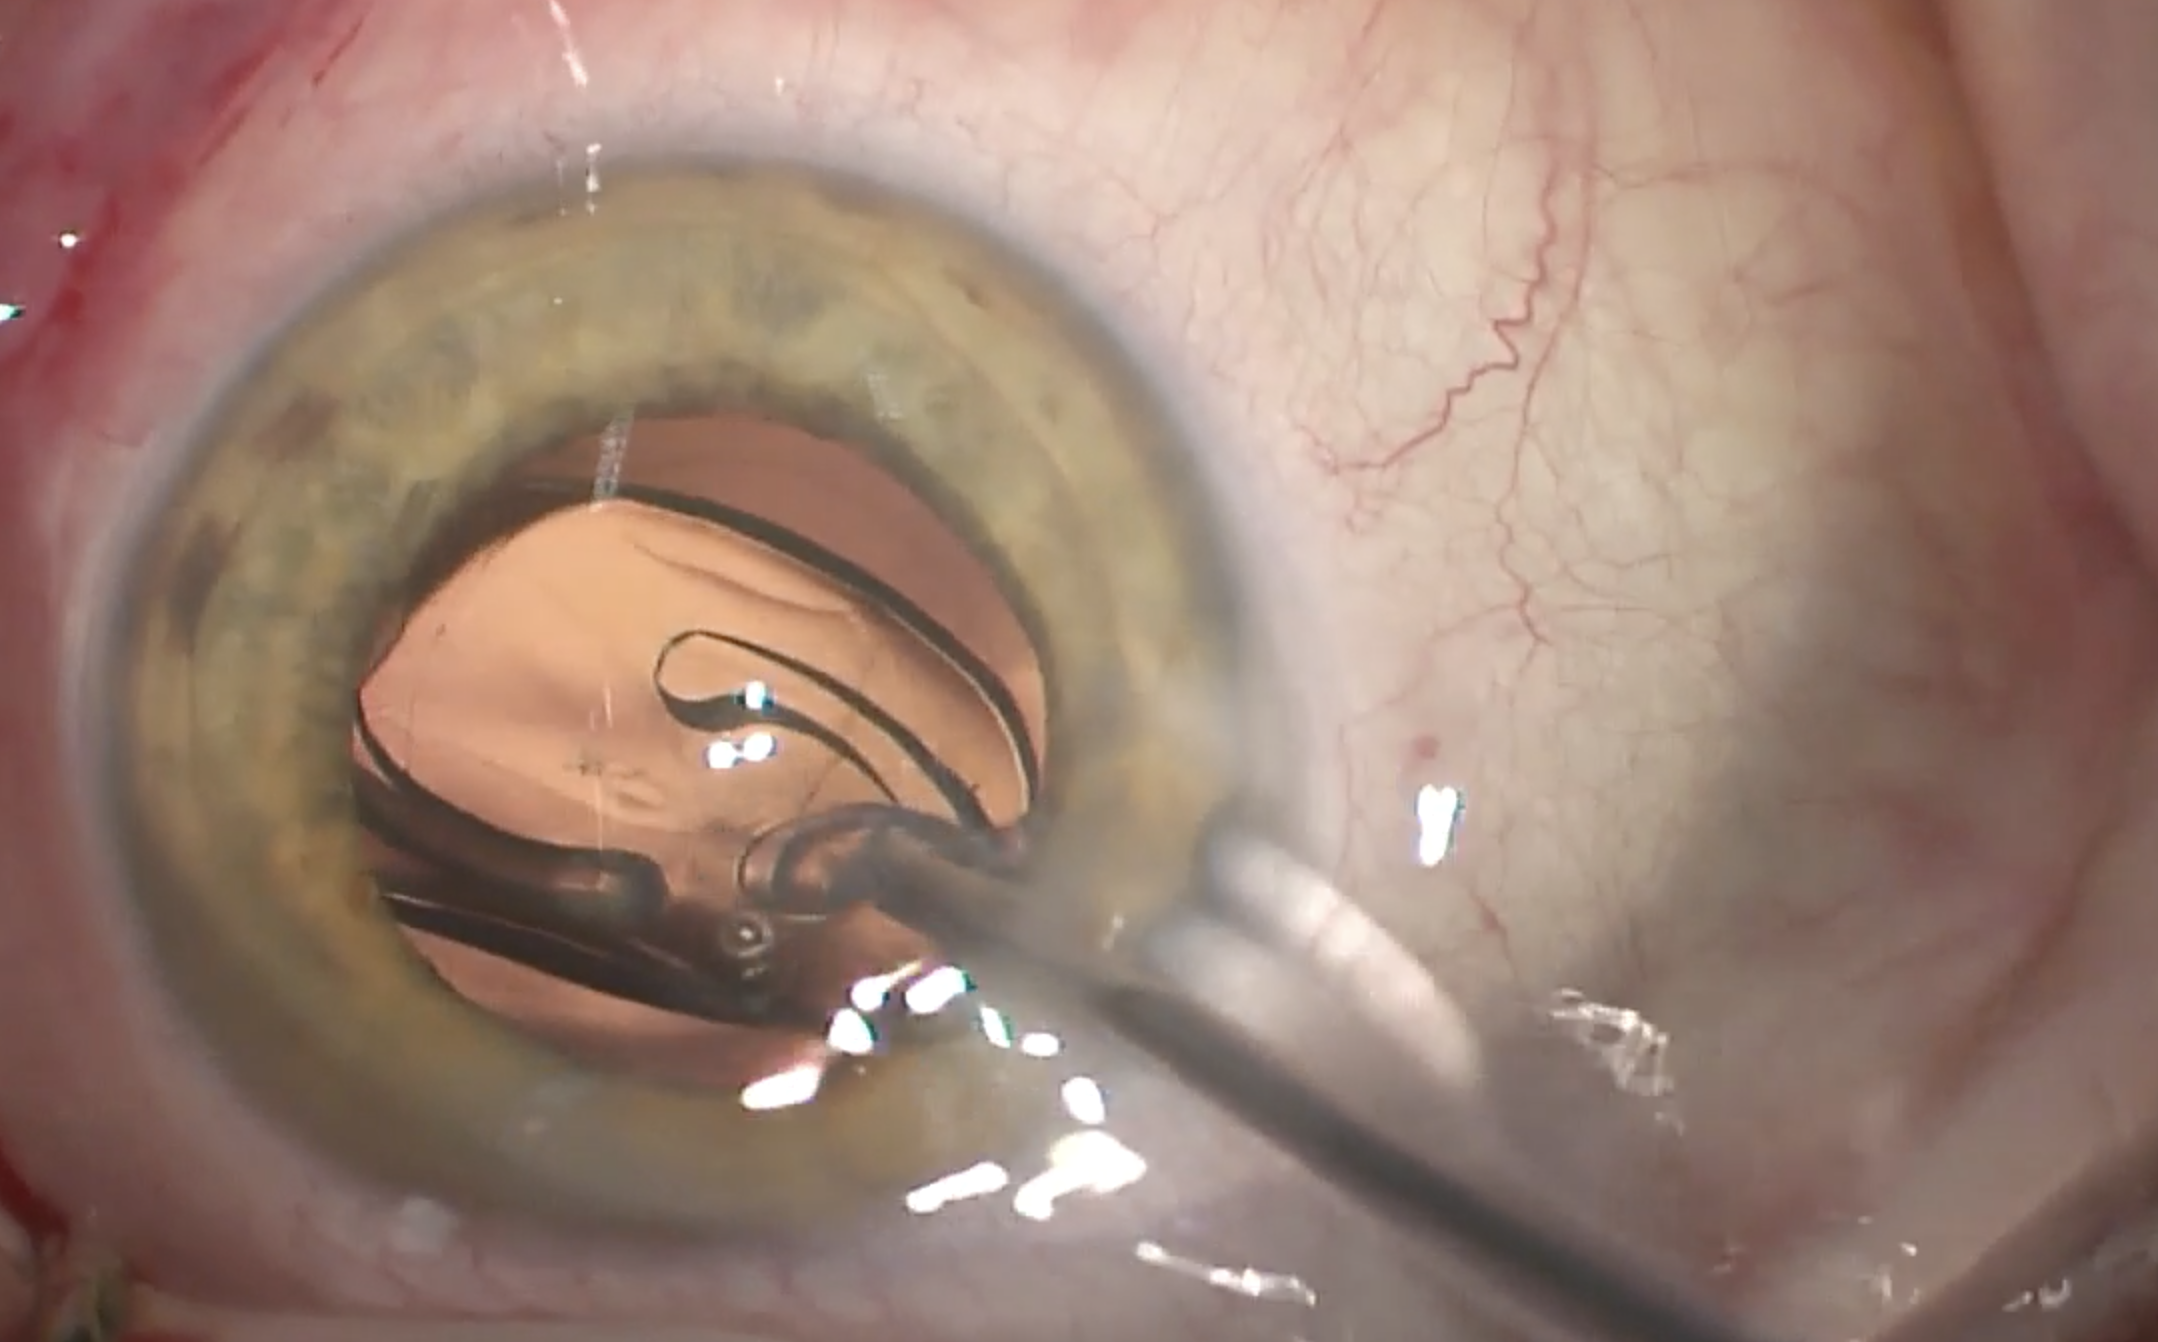 Image of intraocular lens implant